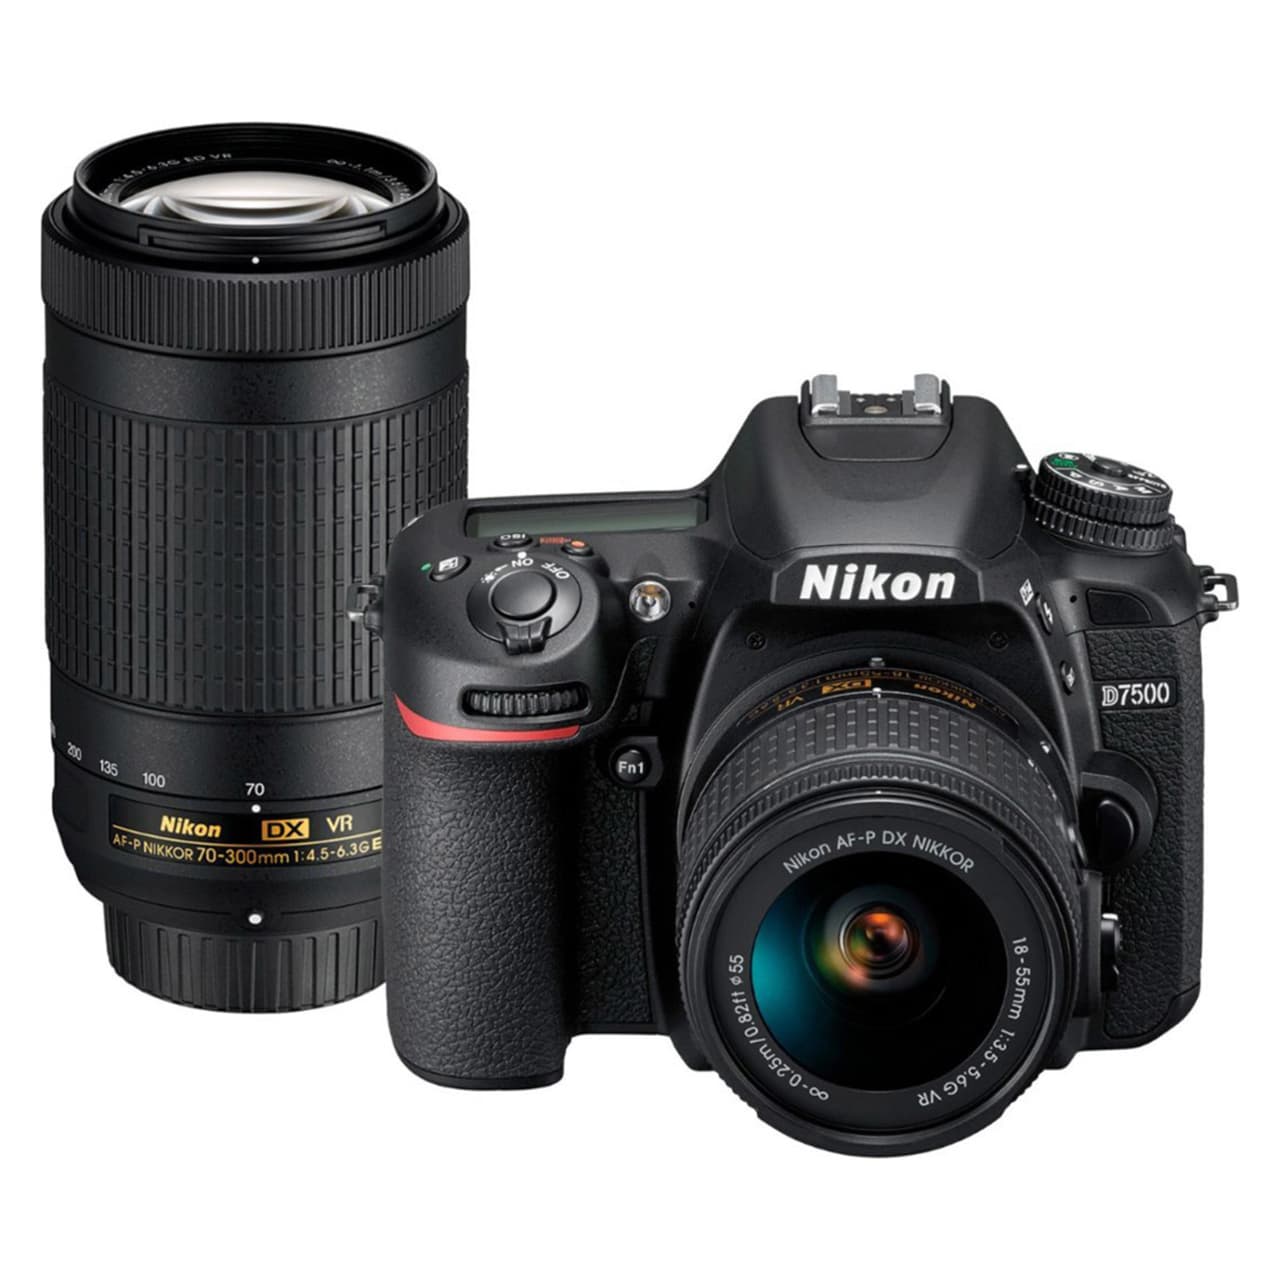 Review: Nikon D7500 is a High-Quality Camera in a Consumer Package